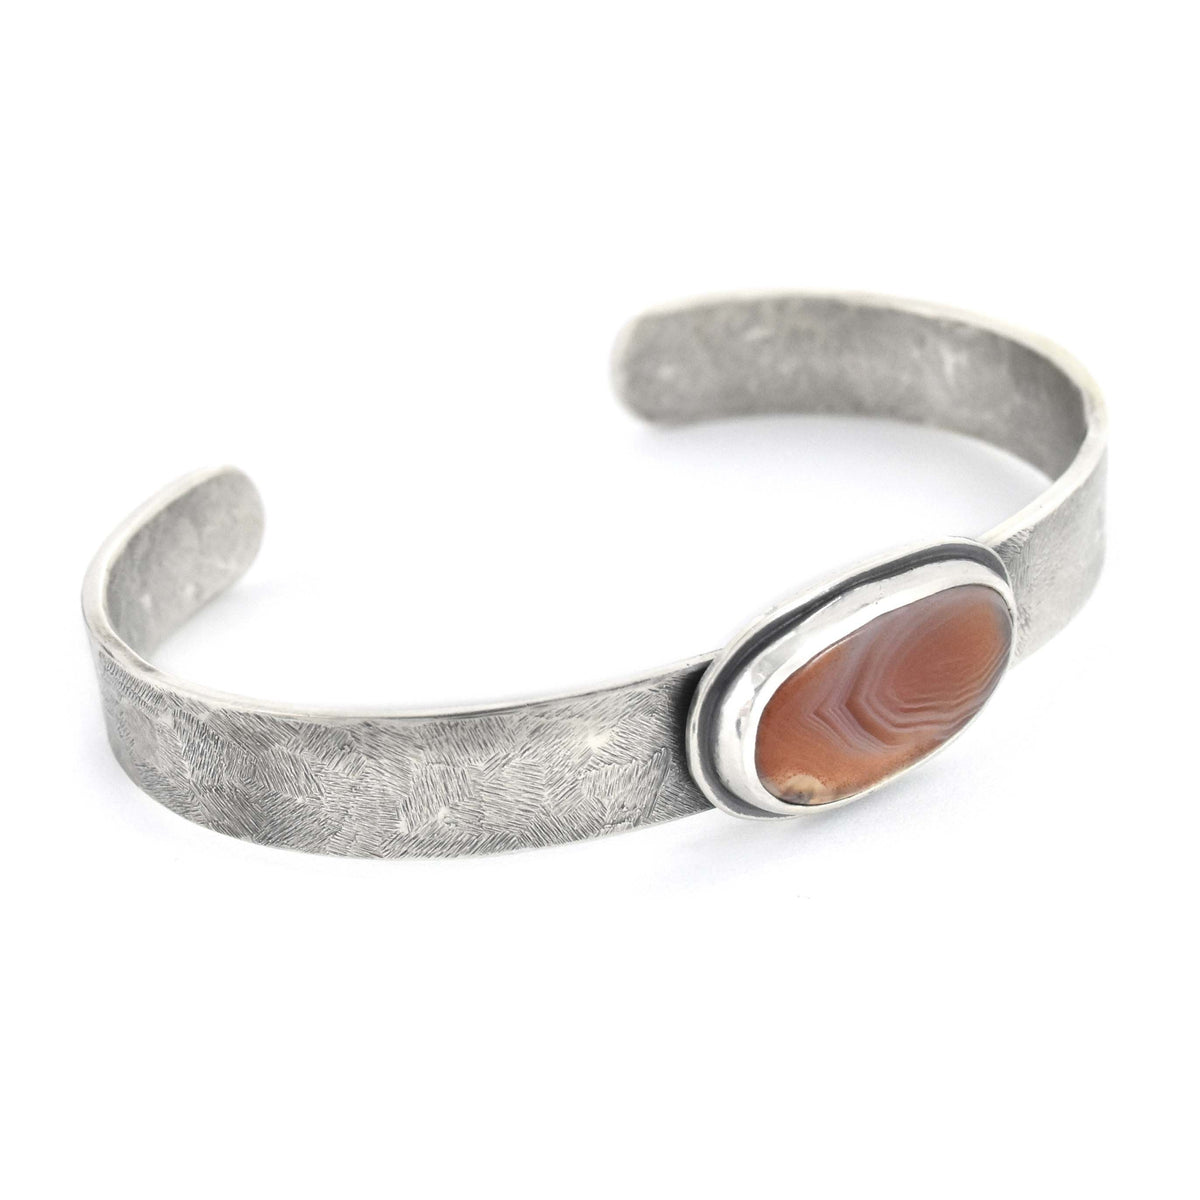 Lake Superior Agate Cuff No. 1  - Size Large - Bracelet   4006 - handmade by Beth Millner Jewelry